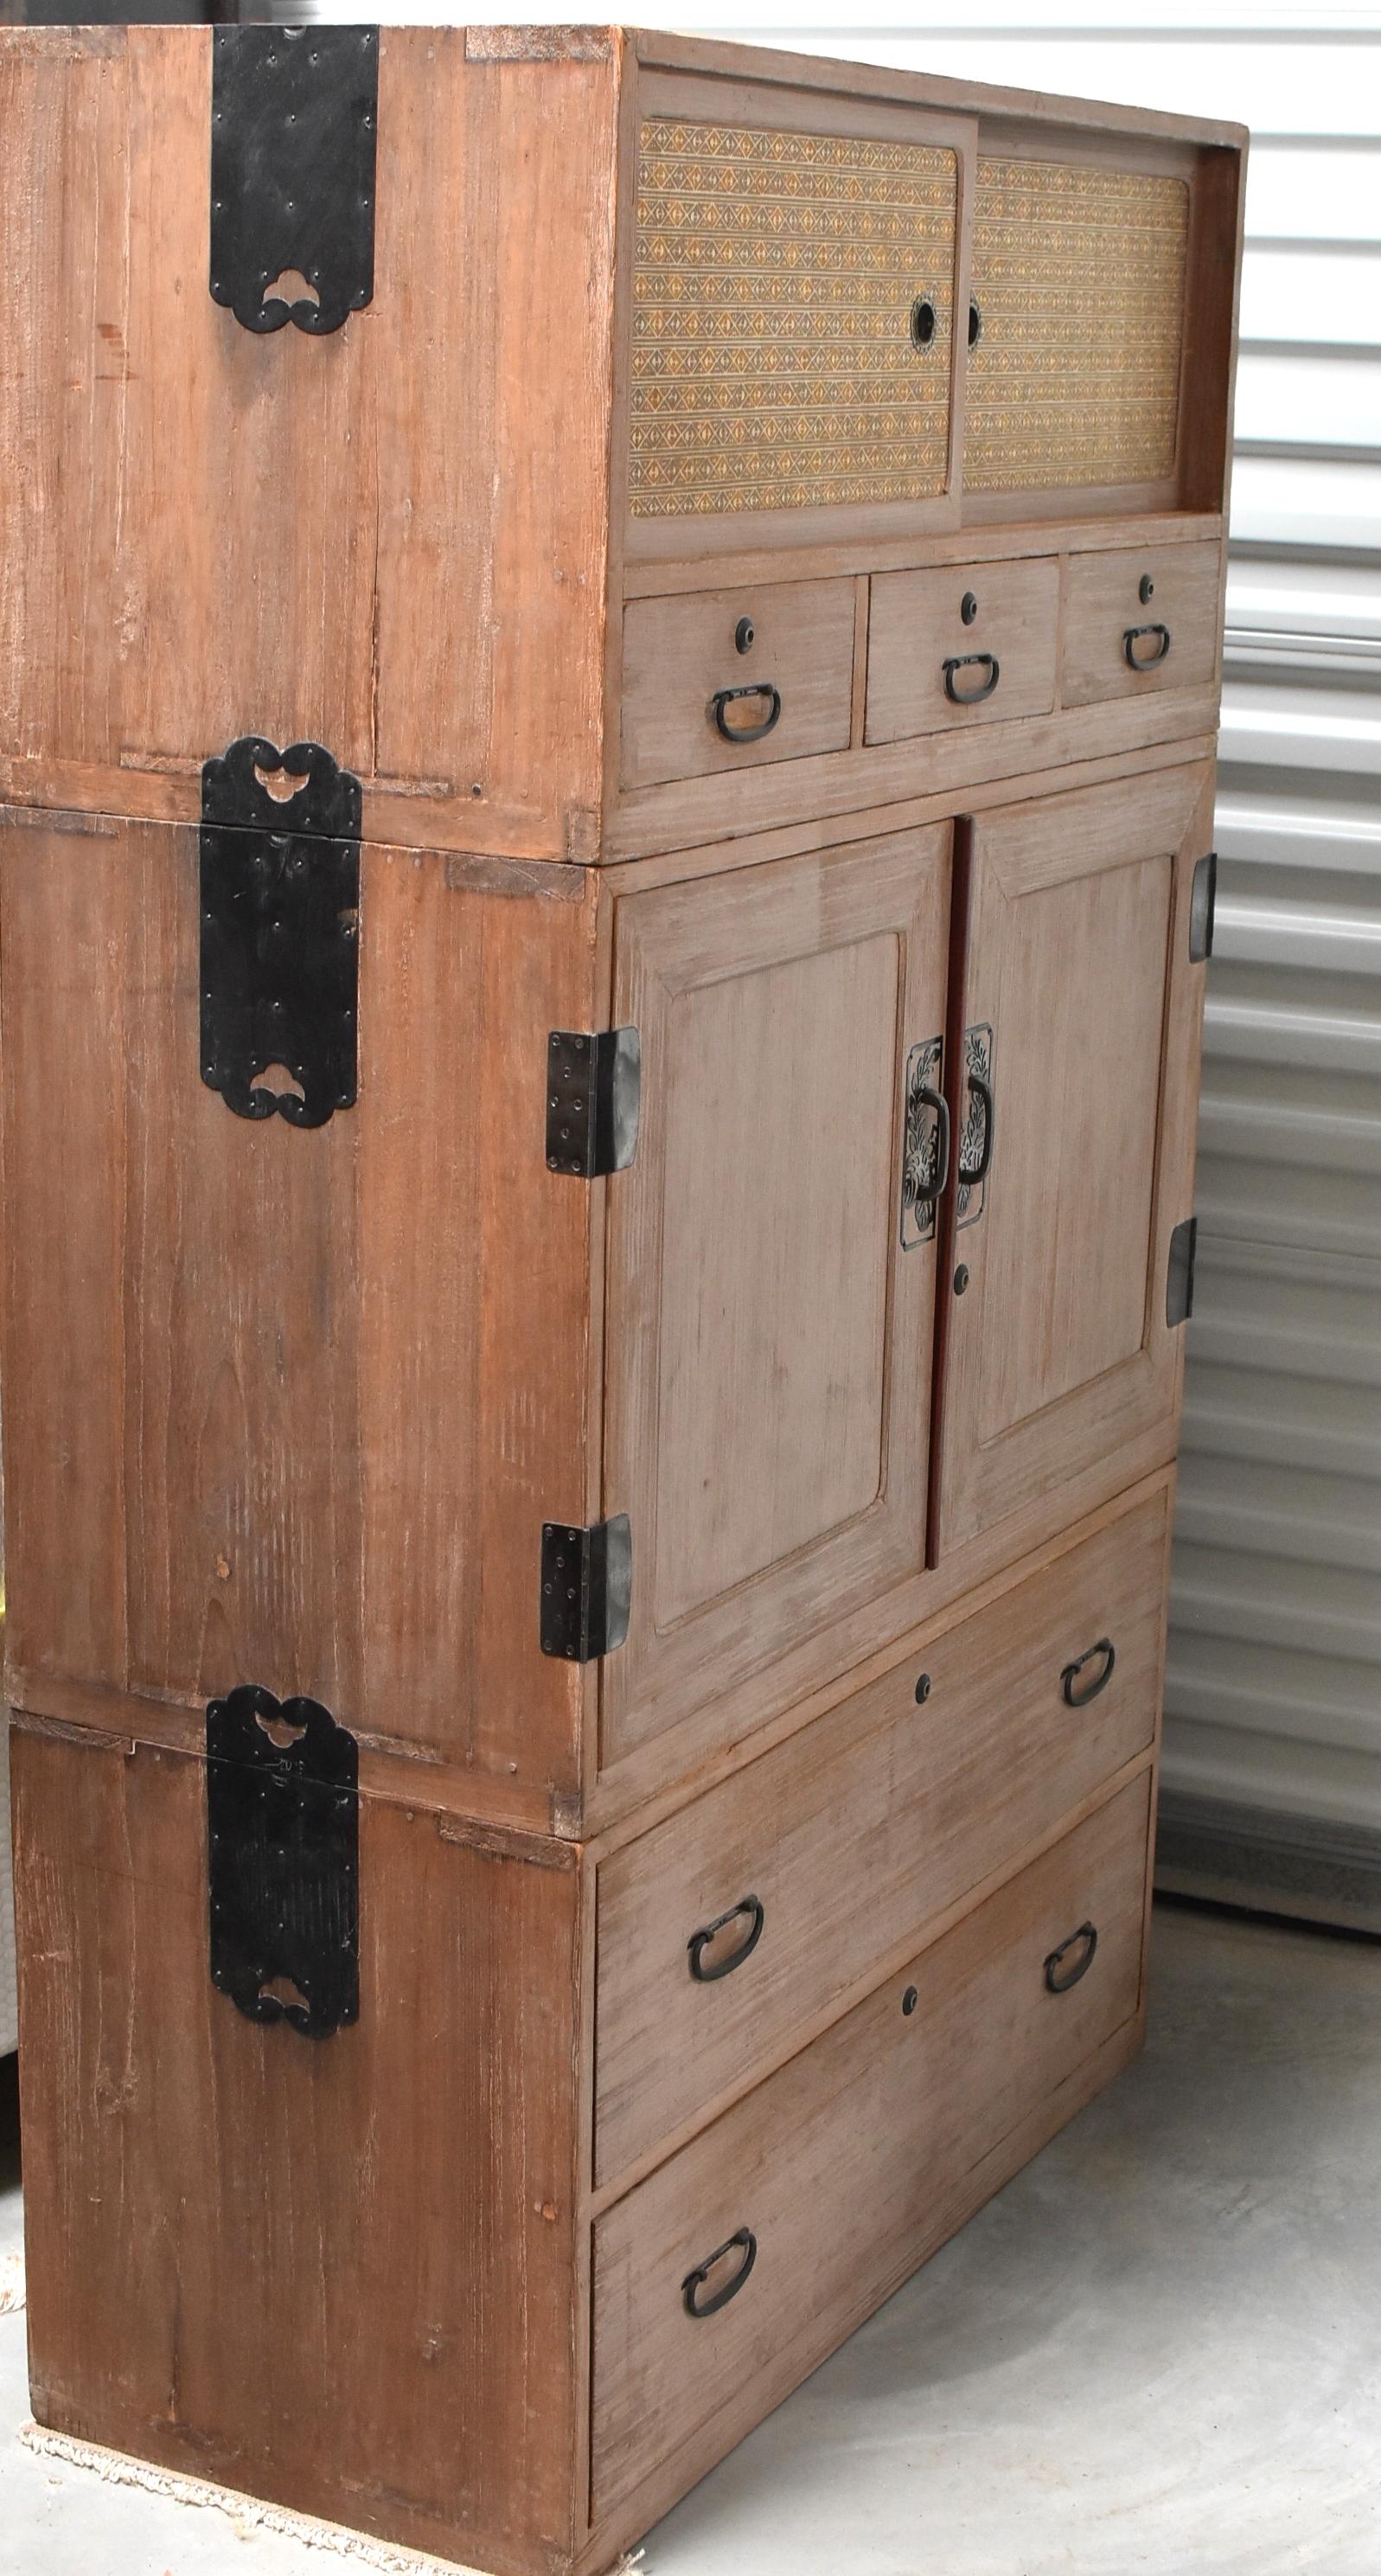 This beautiful Tansu is made of three separate chests. The top has a pair of sliding doors behind which hide a shelf and 2 drawers. There are also three exterior drawers. The middle section is a wonderful 3-tray system which offers great storage for